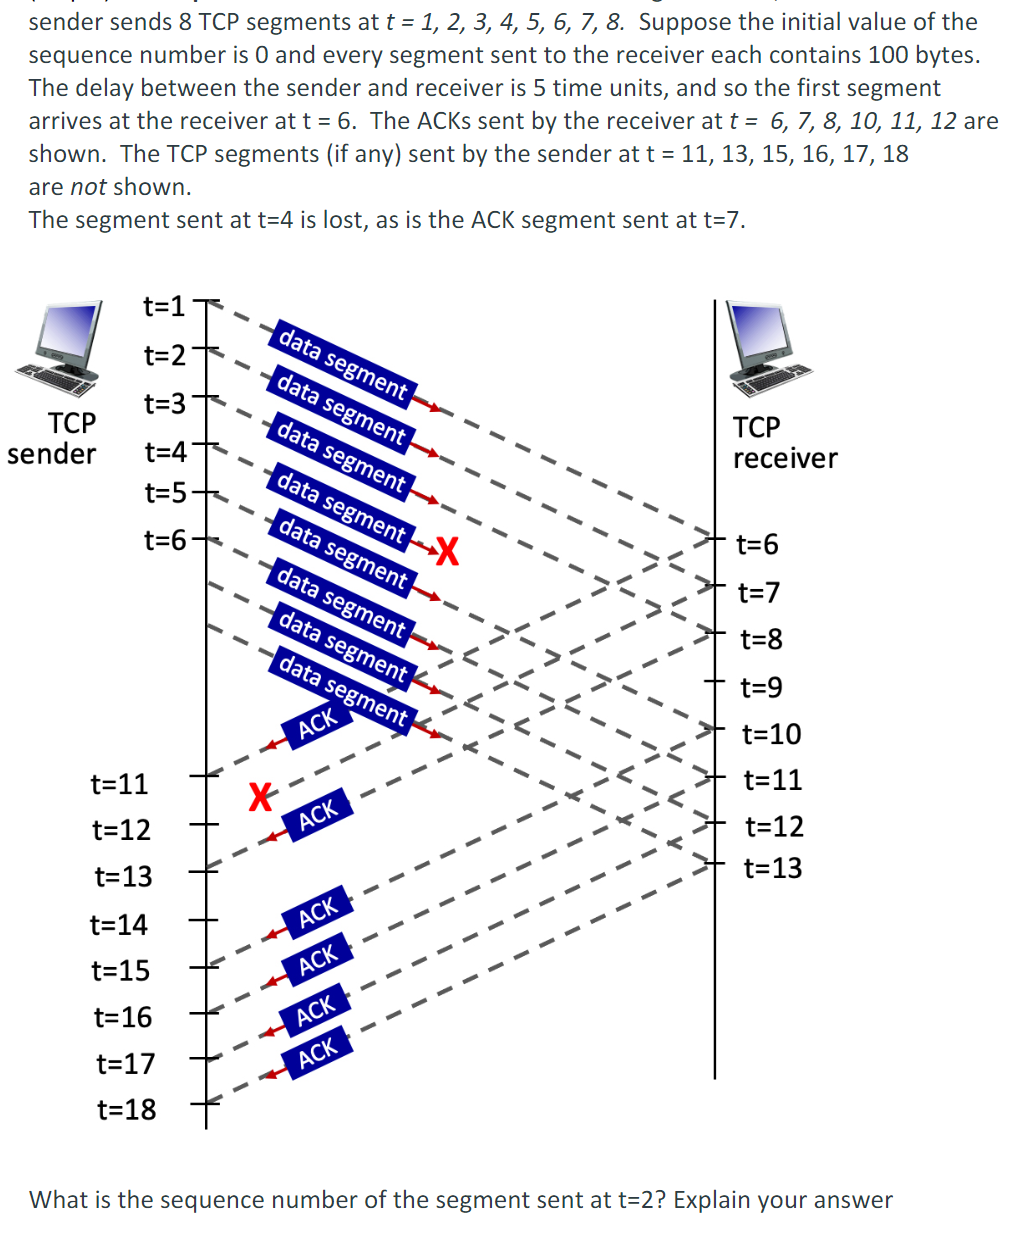 sender sends 8 TCP segments at t = 1, 2, 3, 4, 5, 6, 7, 8. Suppose the initial value of the
sequence number is 0 and every segment sent to the receiver each contains 100 bytes.
The delay between the sender and receiver is 5 time units, and so the first segment
arrives at the receiver at t = 6. The ACKS sent by the receiver at t = 6, 7, 8, 10, 11, 12 are
shown. The TCP segments (if any) sent by the sender at t = 11, 13, 15, 16, 17, 18
are not shown.
The segment sent at t=4 is lost, as is the ACK segment sent at t=7.
TCP
sender
t=1 T
t=2
t=3+
t=41
t=5-
t=6-
t=11
t=12
t=13
t=14
t=15
t=16
t=17
t=18
I
7
I
data segment
data segment
data segment
data segment
data segment
data segment
data segment
data segment
ACK
ACK
ACK
ACK
ACK
ACK
V V
VAALAN
IV VI
ttt
TCP
receiver
t=6
t=7
t=8
t=9
t=10
t=11
t=12
t=13
What is the sequence number of the segment sent at t=2? Explain your answer